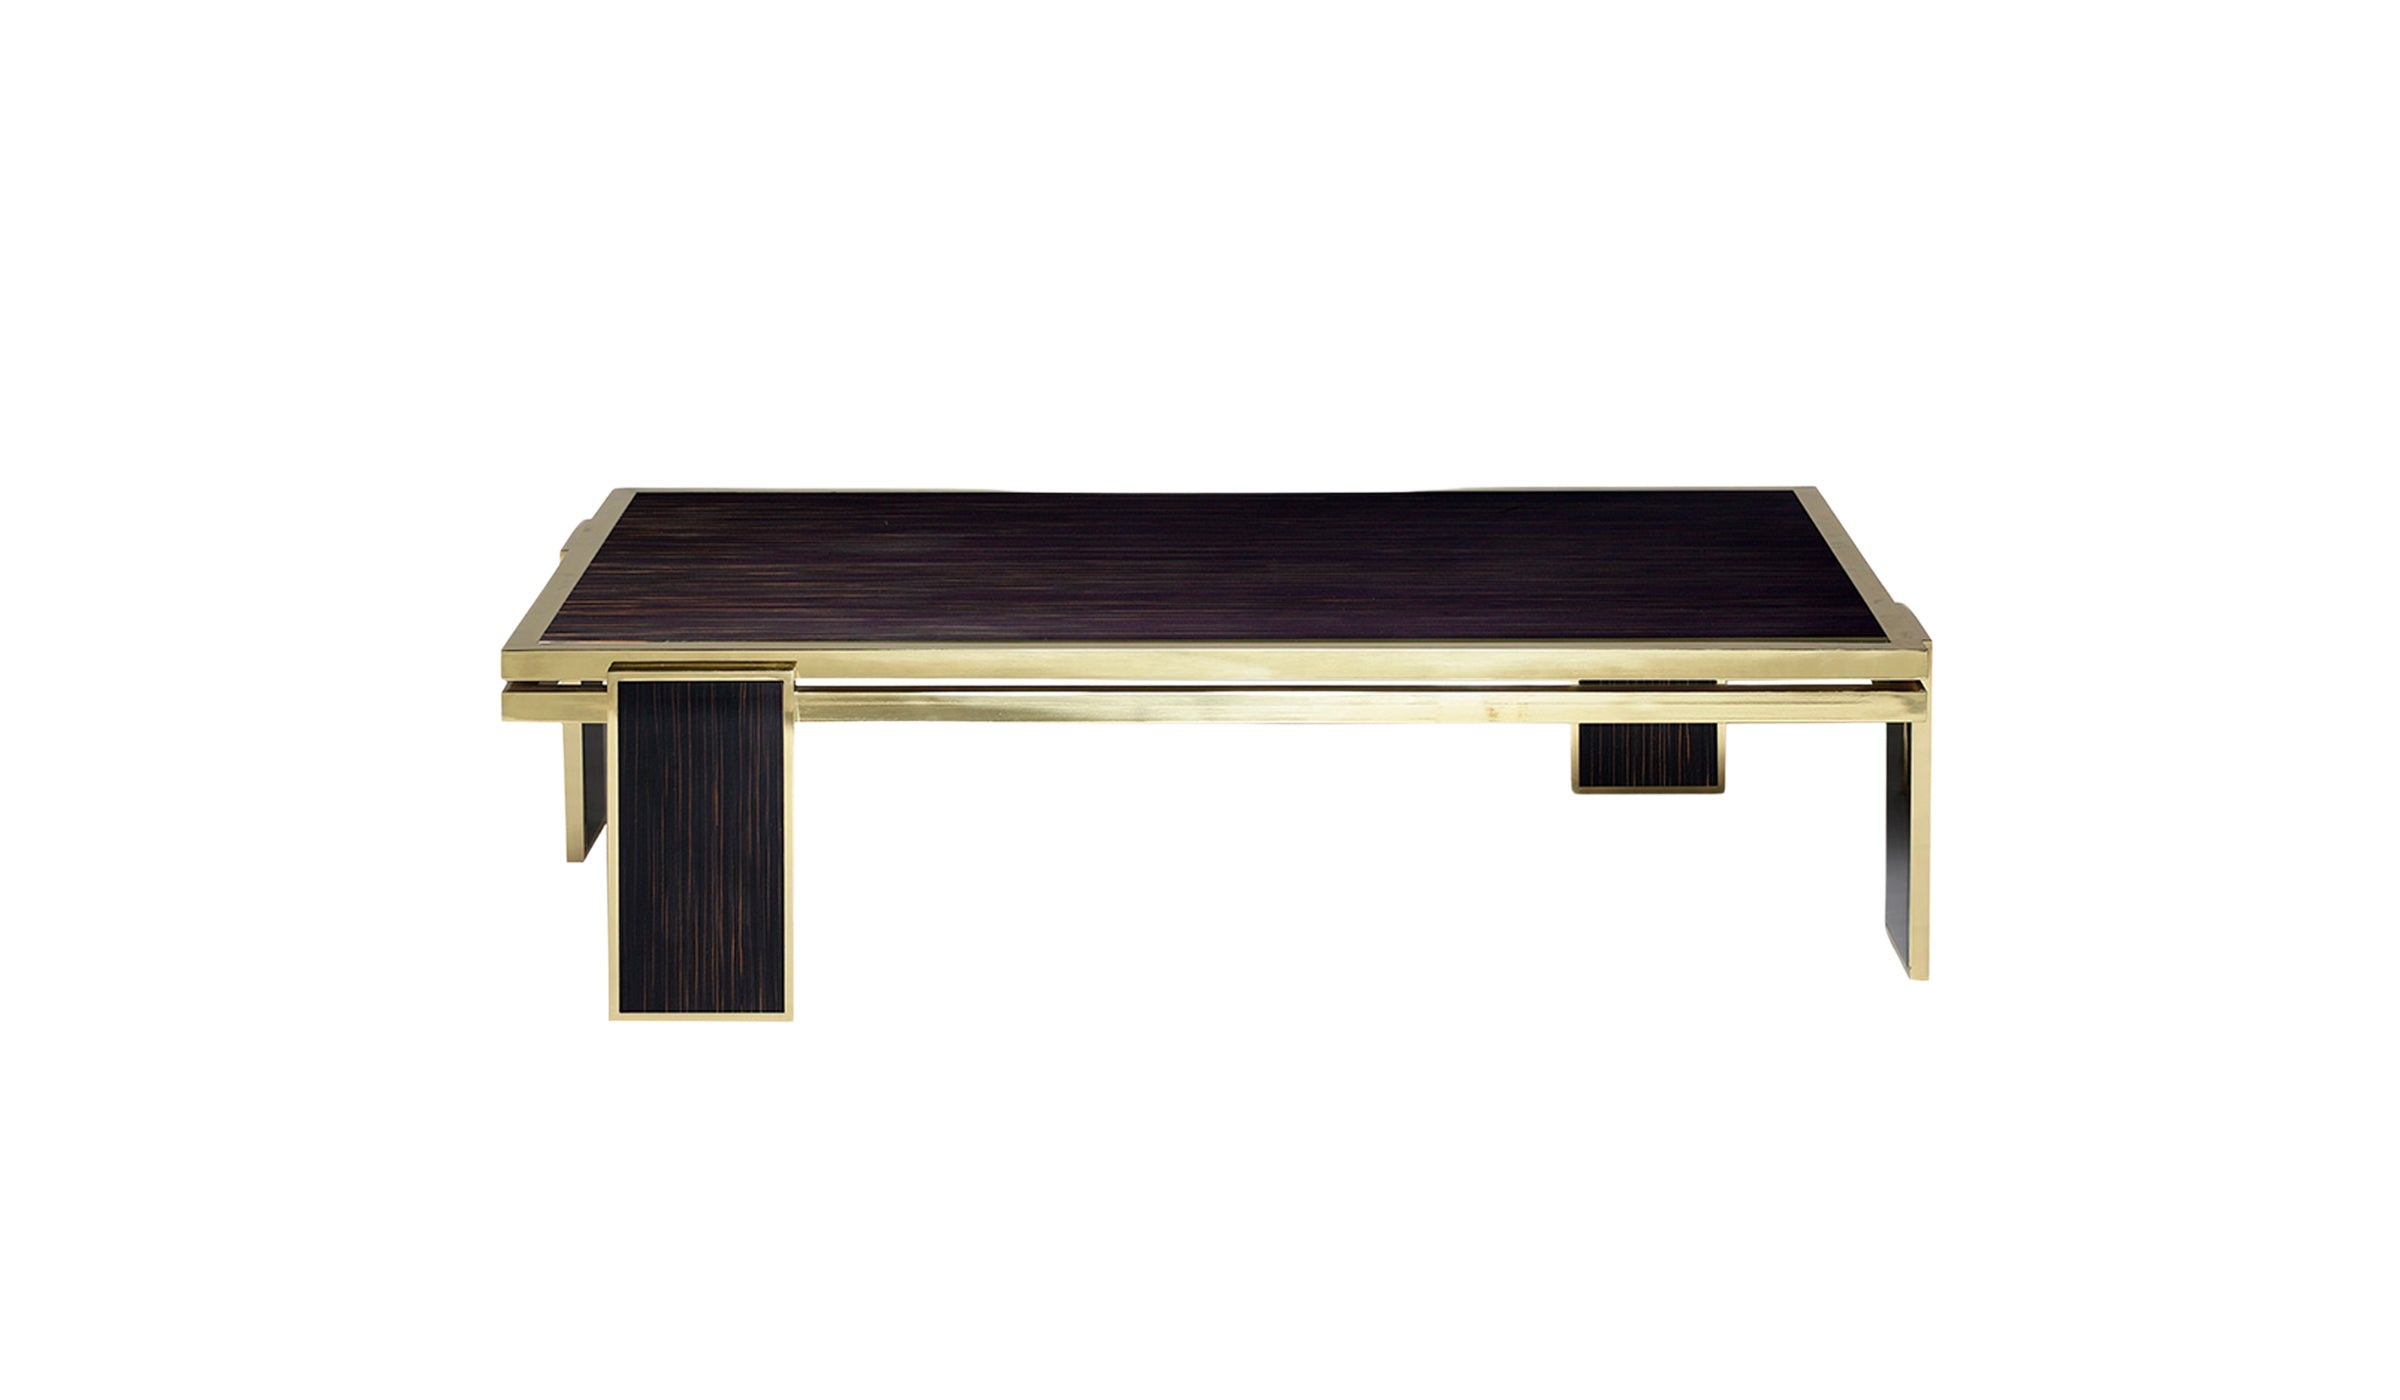 James - Polished brass and ebony wood coffee table with glossy lacquer finish